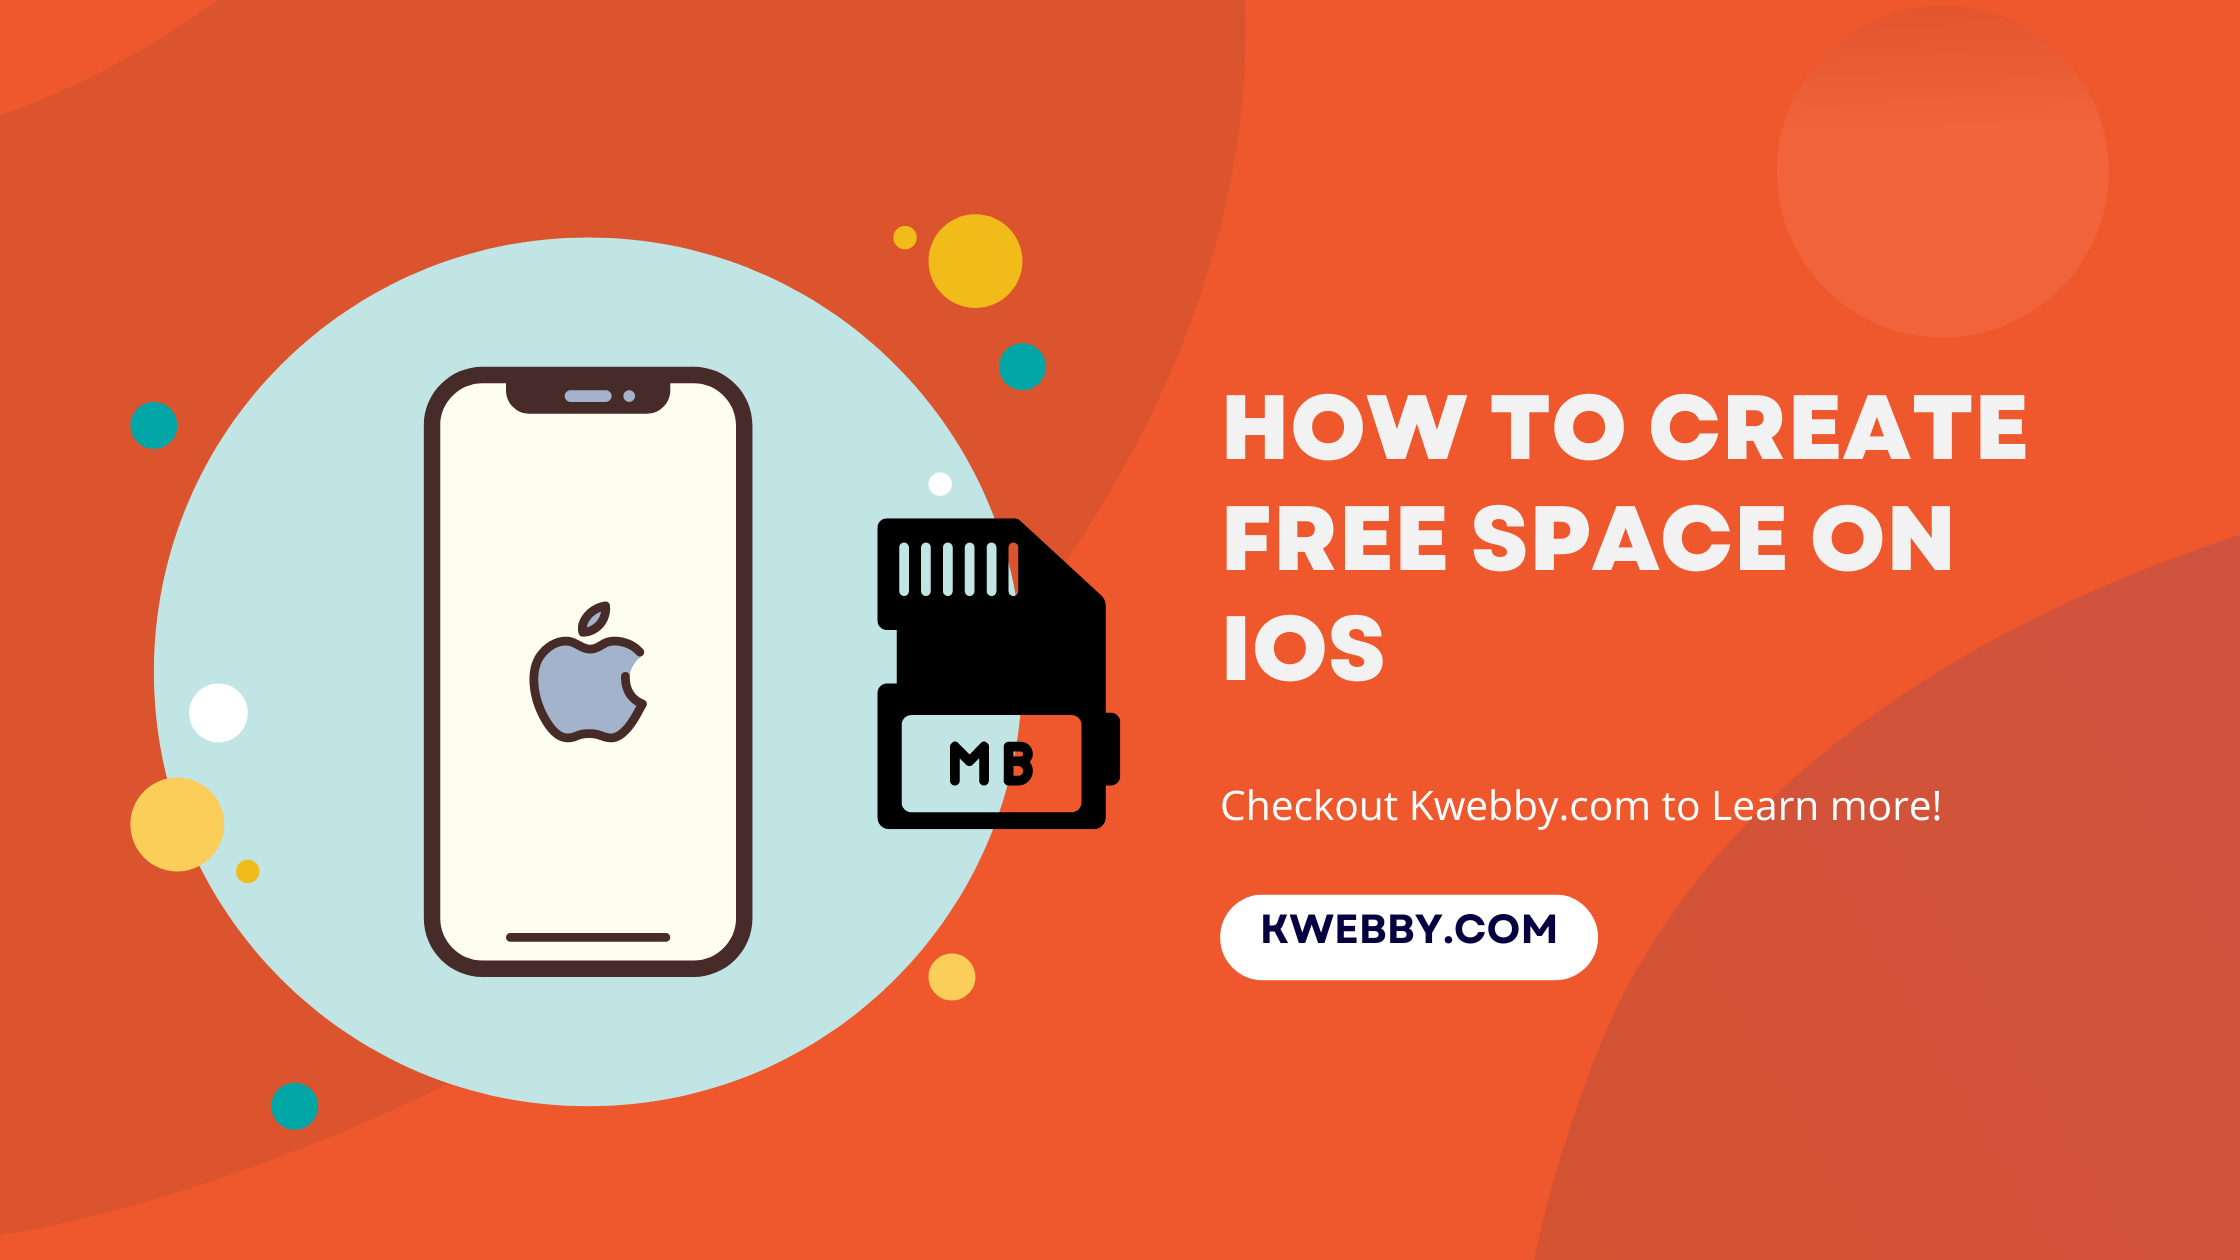 How to Create Free Space on iOS